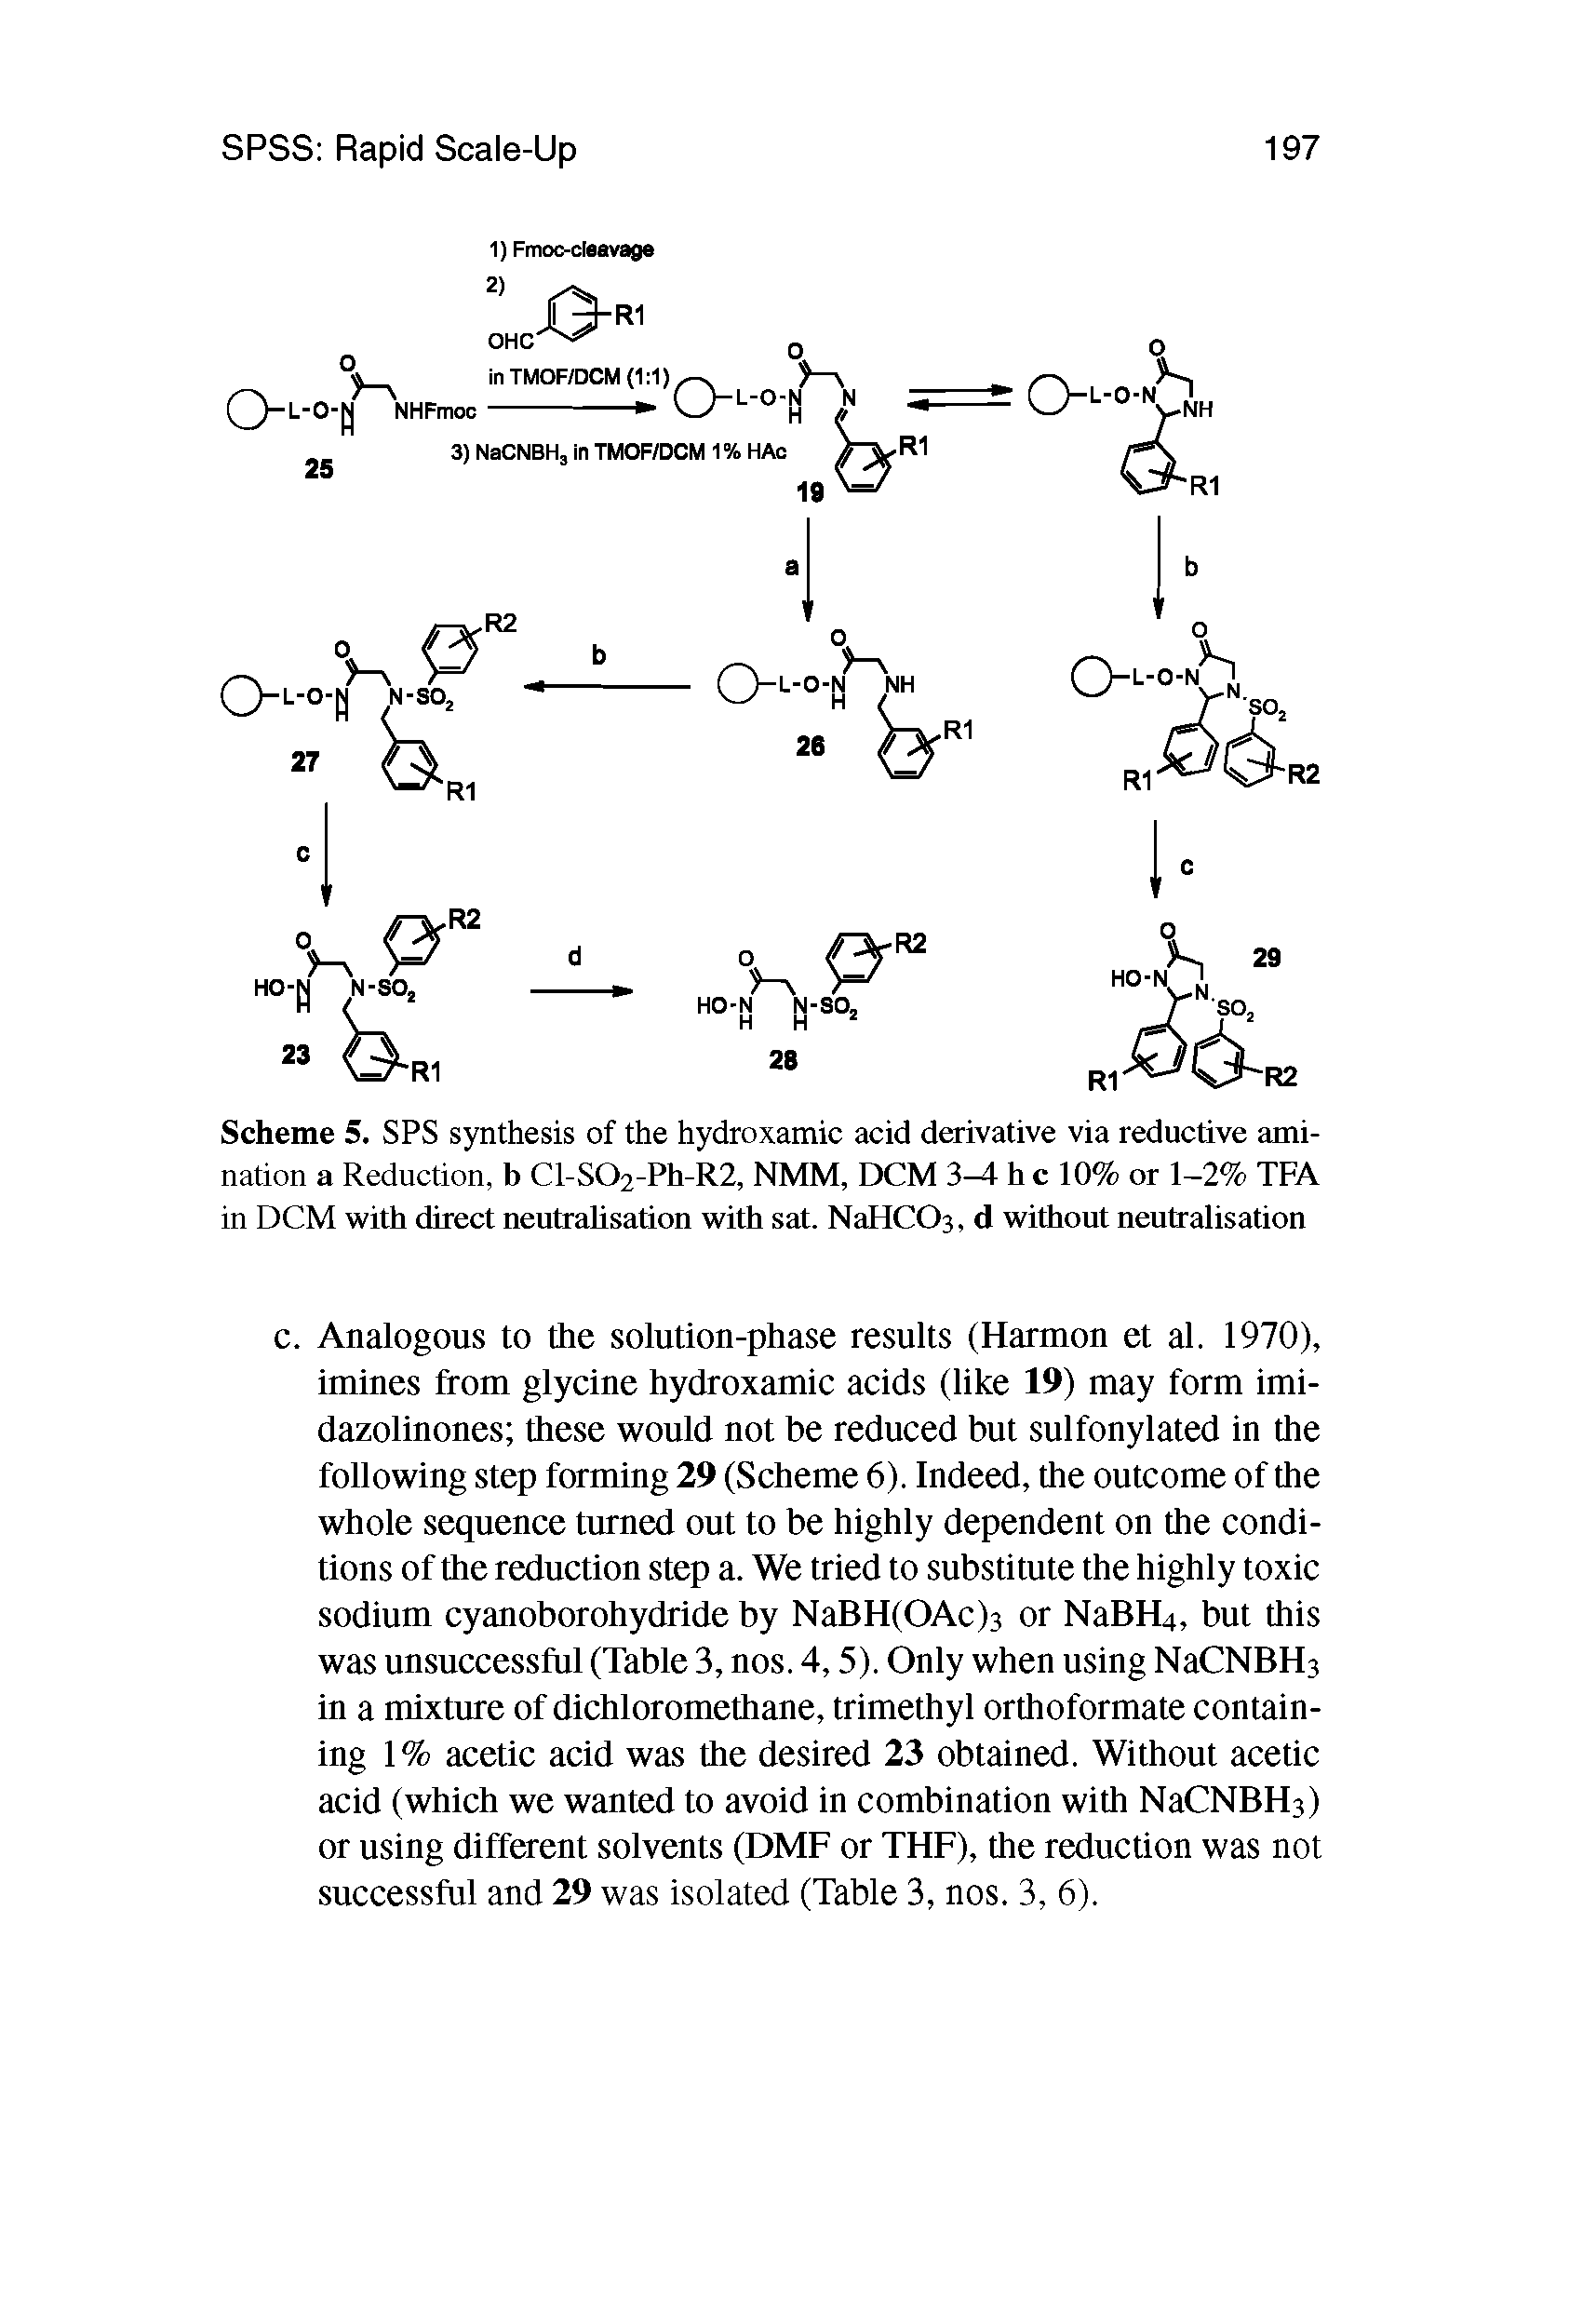 Scheme 5. SPS synthesis of the hydroxamic acid derivative via reductive ami-nation a Reduction, b Cl-S02-Ph-R2, NMM, DCM 3M h c 10% or 1-2% TFA in DCM with direct neutralisation with sat. NaHCCb, d without neutralisation...